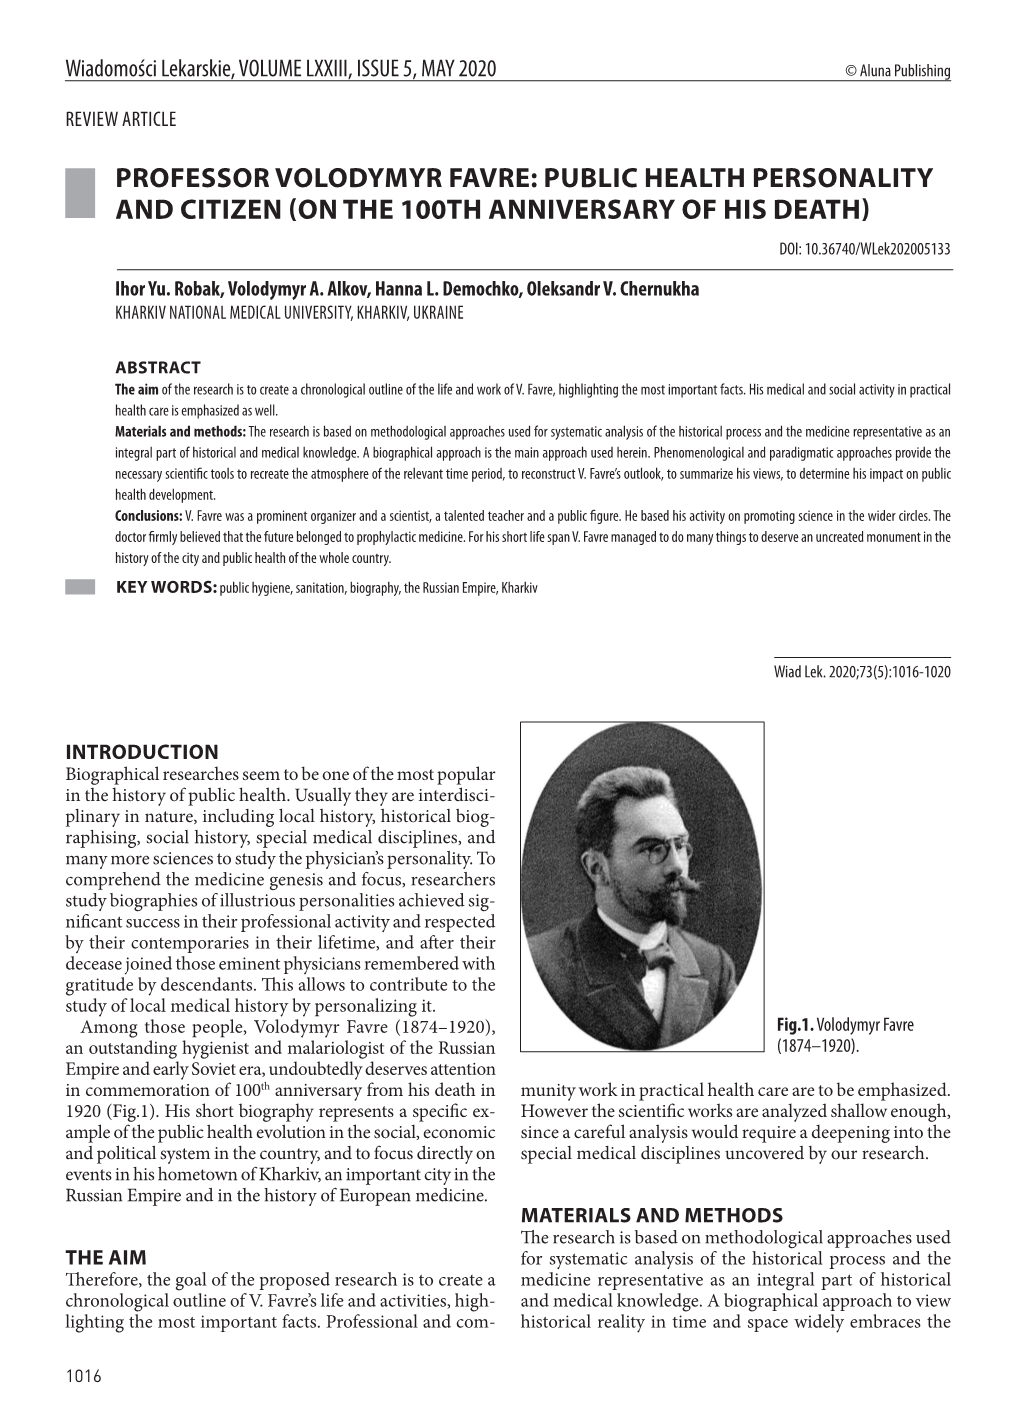 PROFESSOR VOLODYMYR FAVRE: PUBLIC HEALTH PERSONALITY and CITIZEN (ON the 100TH ANNIVERSARY of HIS DEATH) DOI: 10.36740/Wlek202005133